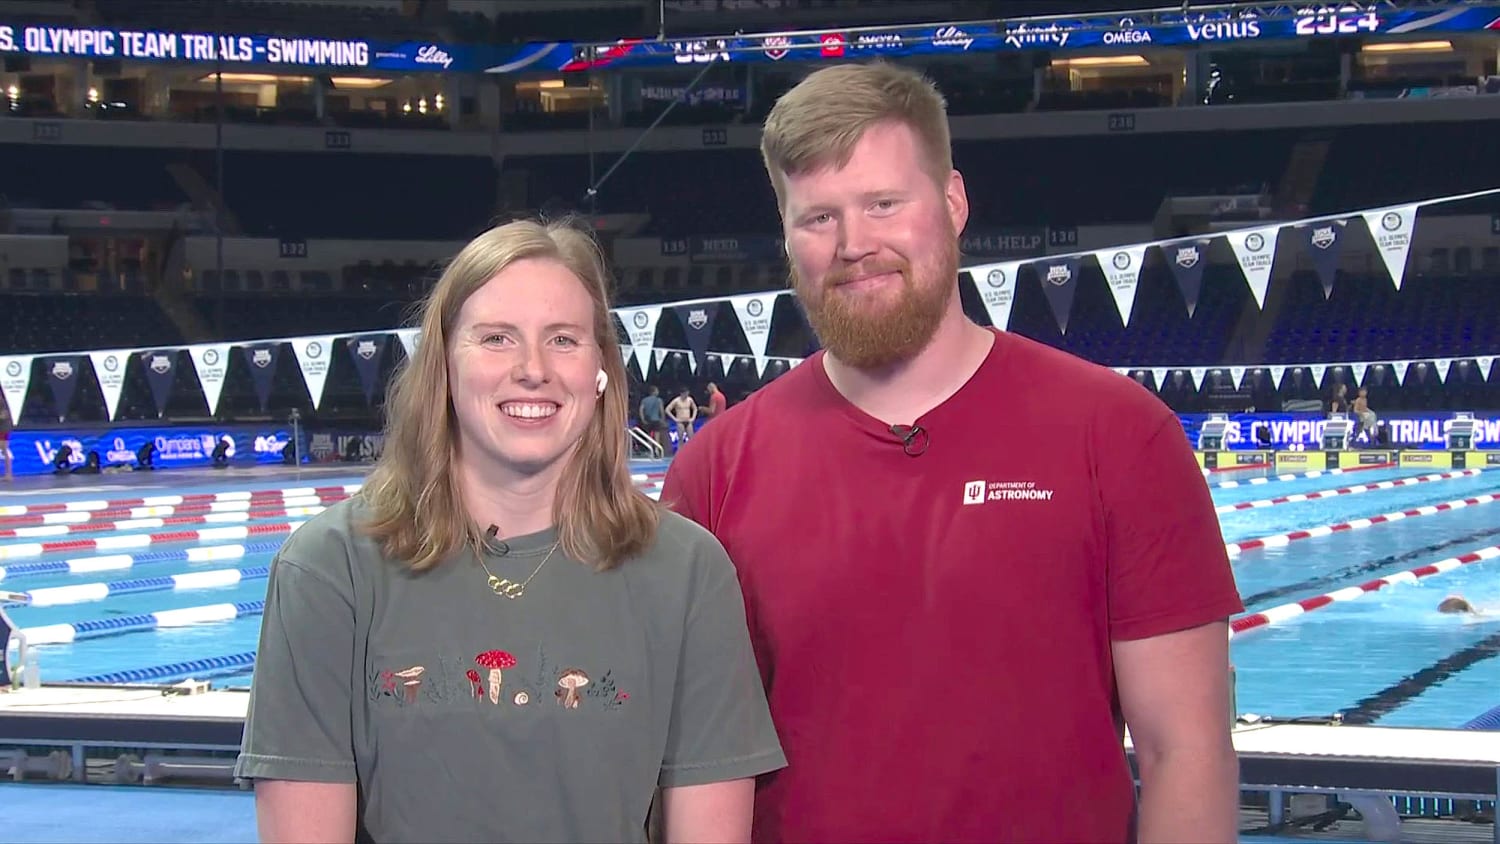 Swimmer Lilly King, Fiancé James Wells Discuss Proposal On TODAY Show